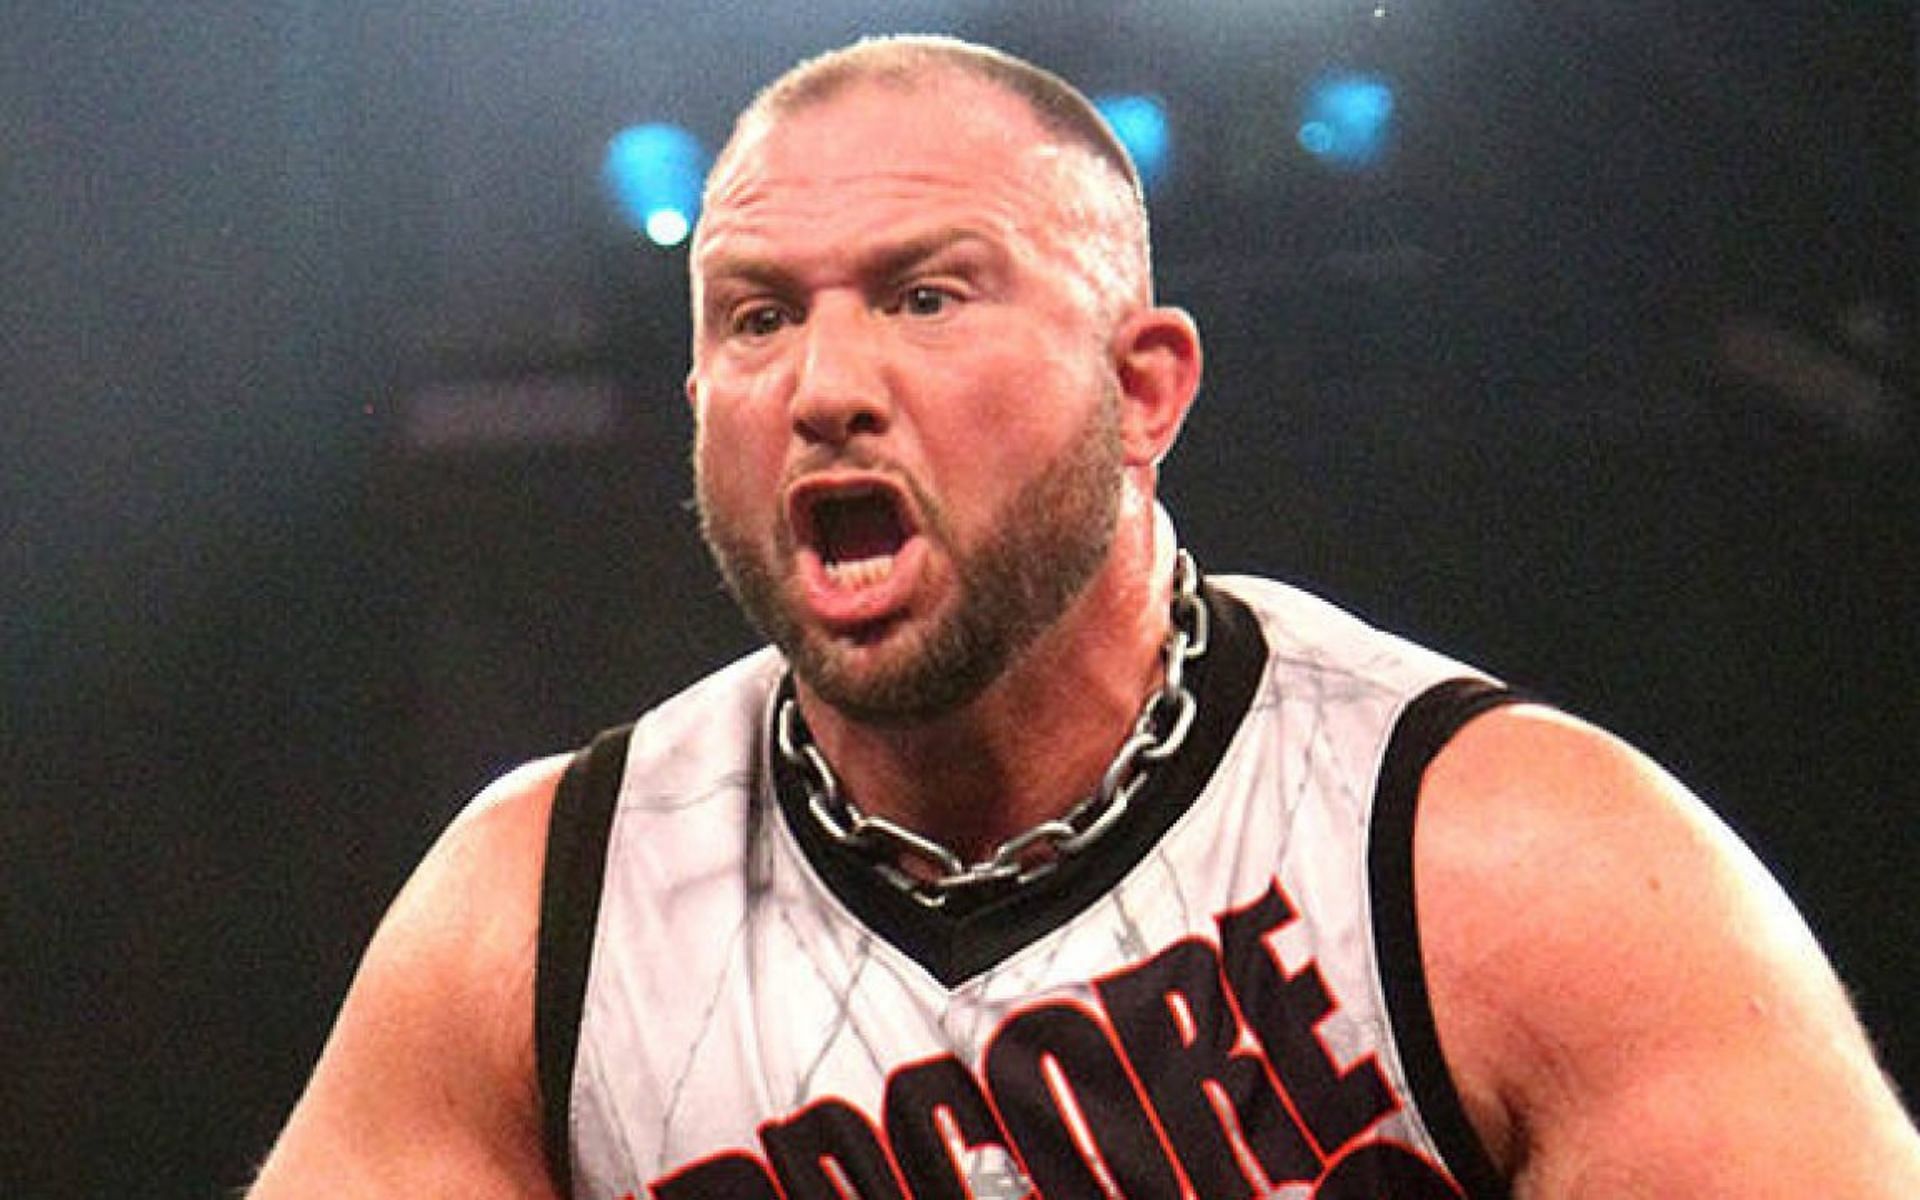 WWE Hall of Famer, Bully Ray jokes with current SmackDown superstar